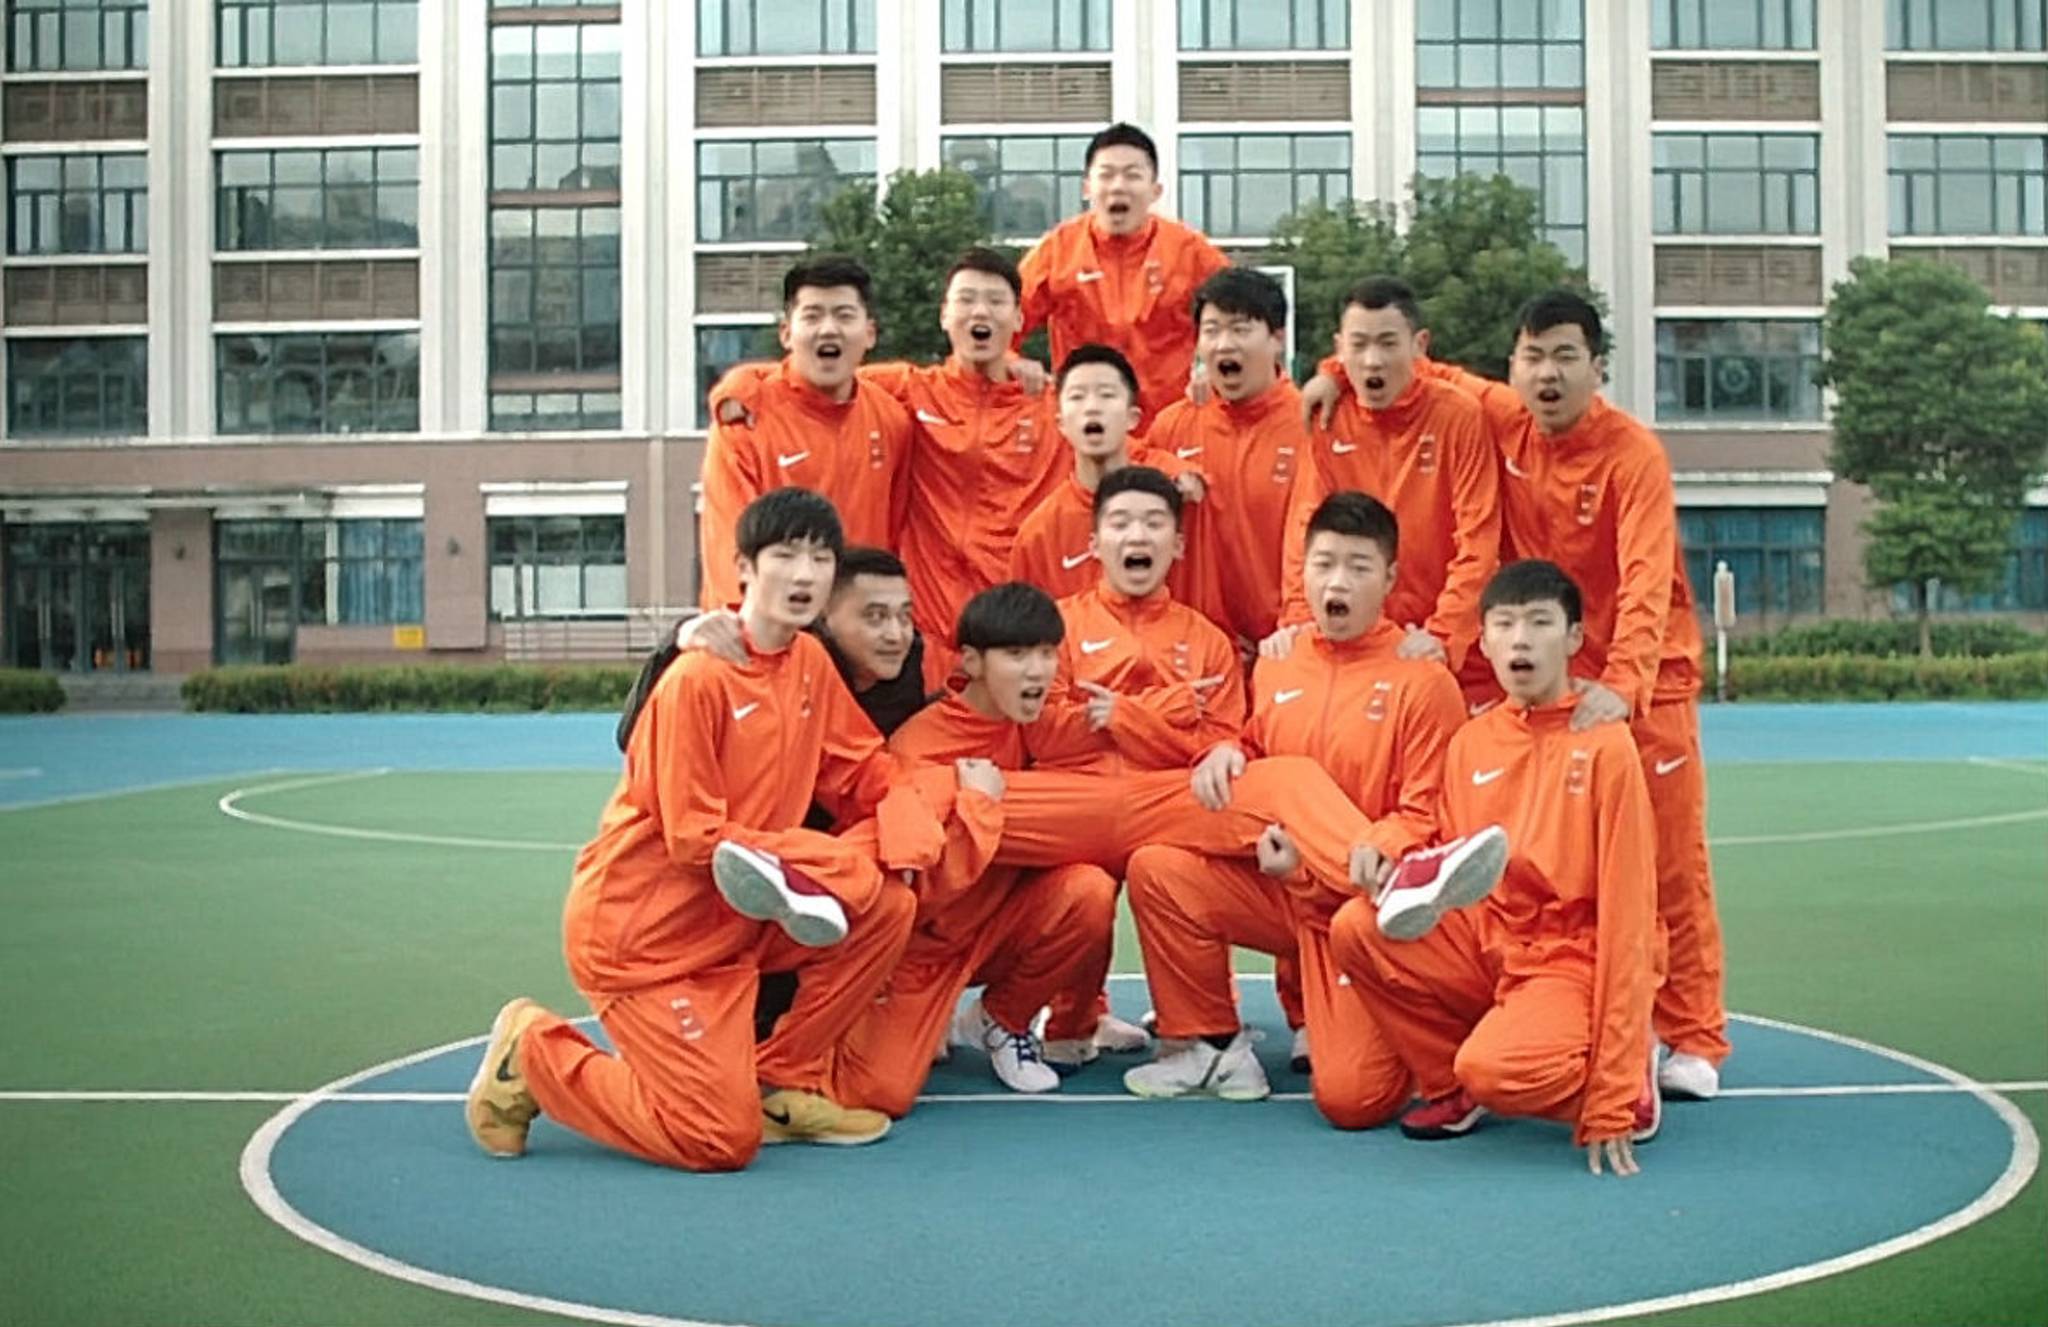 Nike ad motivates young Chinese basketballers